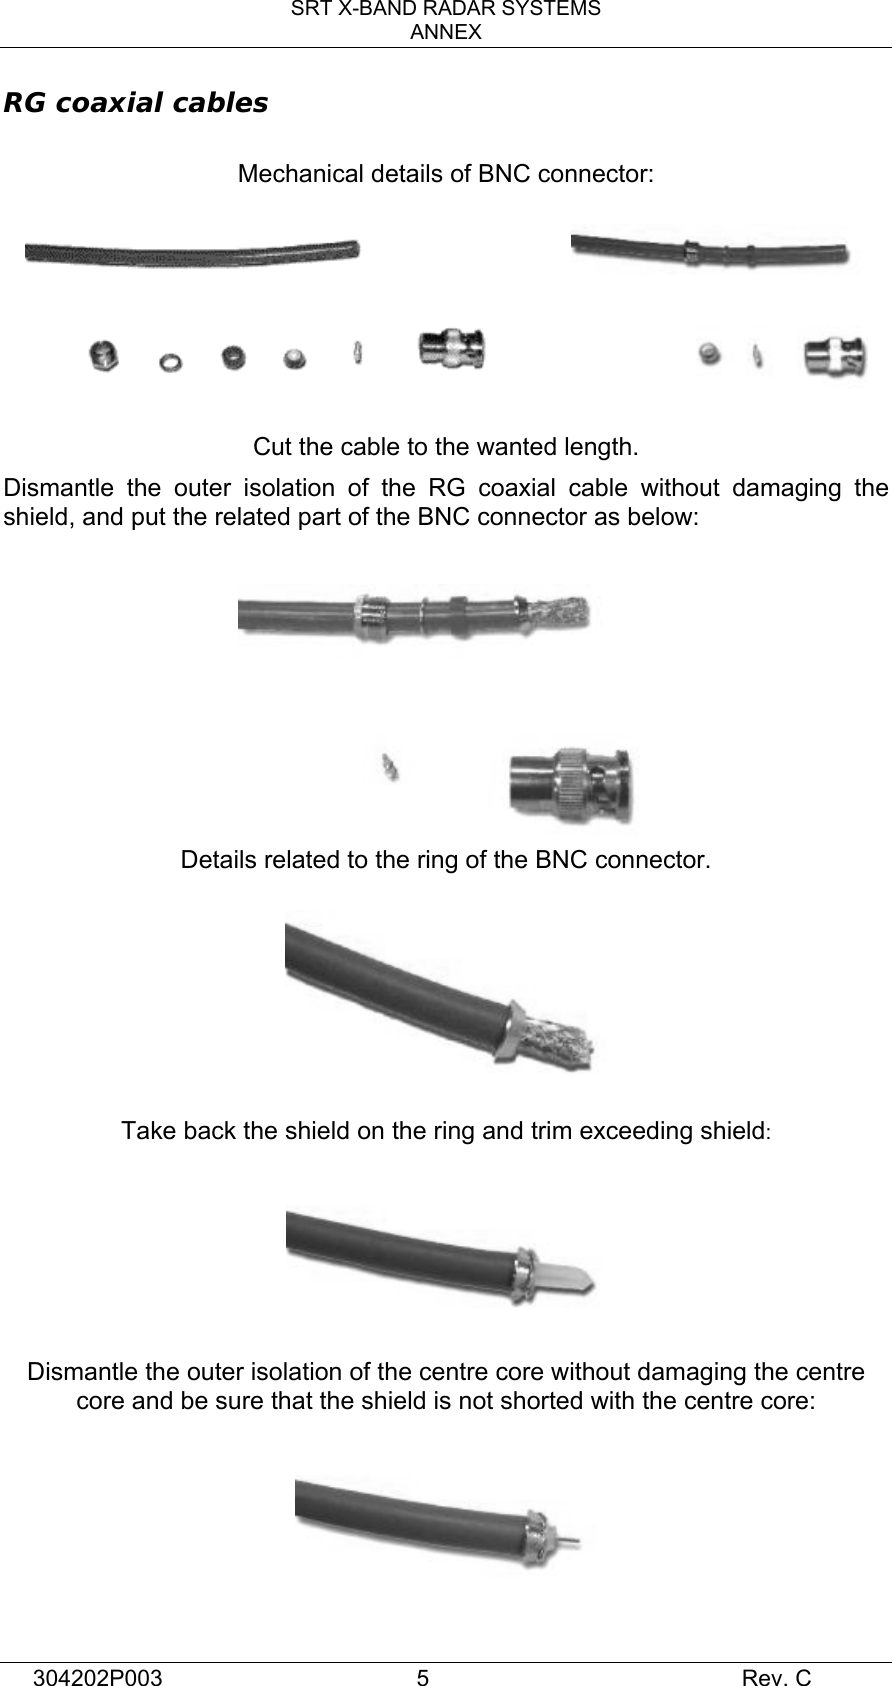 SRT X-BAND RADAR SYSTEMS ANNEX 304202P003  5     Rev. C RG coaxial cables  Mechanical details of BNC connector:                Cut the cable to the wanted length. Dismantle the outer isolation of the RG coaxial cable without damaging the shield, and put the related part of the BNC connector as below:    Details related to the ring of the BNC connector.    Take back the shield on the ring and trim exceeding shield:     Dismantle the outer isolation of the centre core without damaging the centre core and be sure that the shield is not shorted with the centre core:    